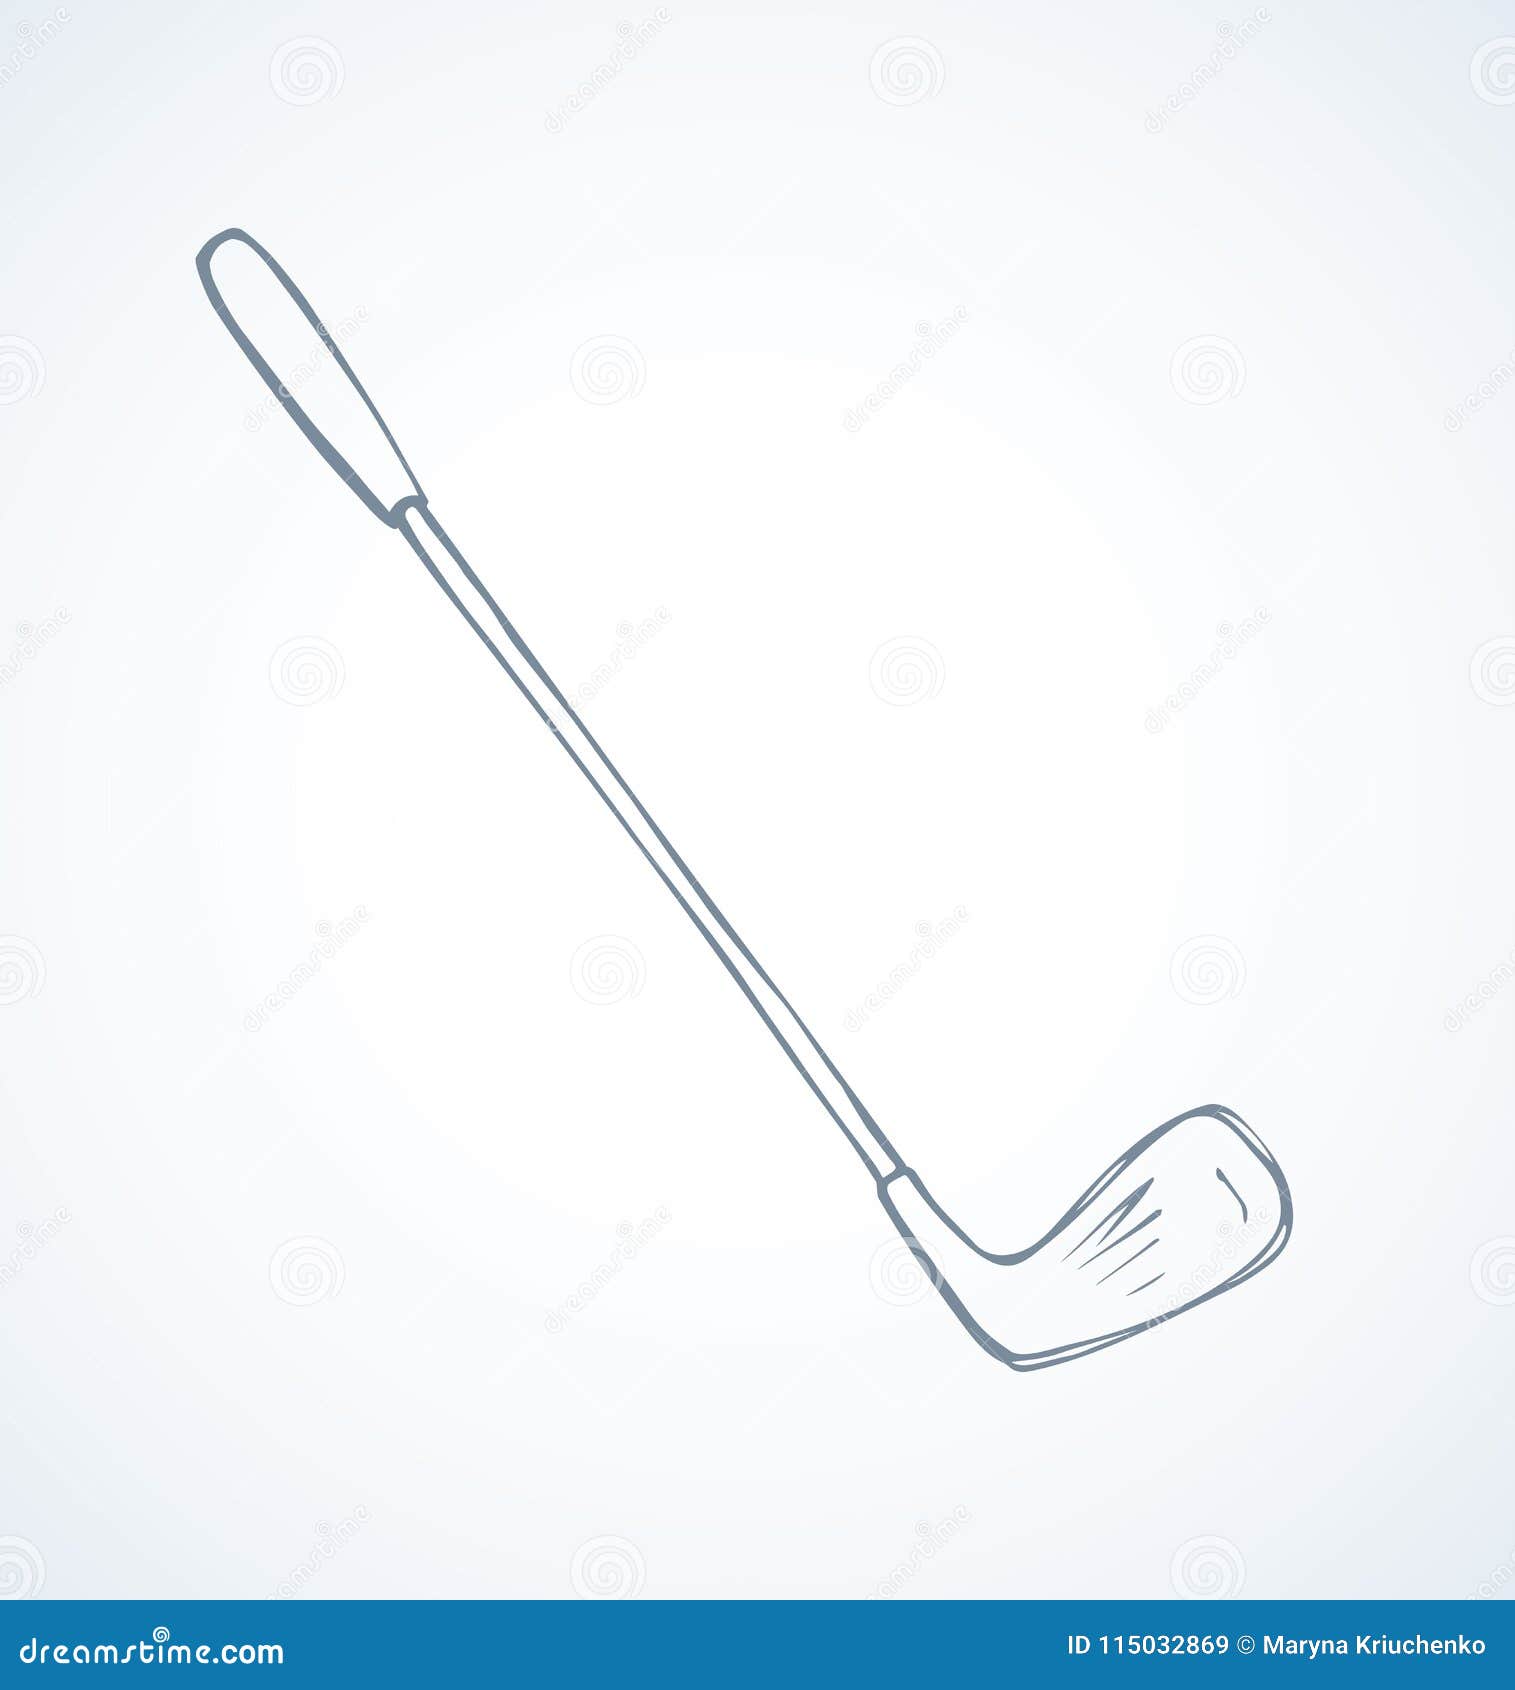 The Golf Club. Vector Drawing Stock Vector - Illustration of athletic